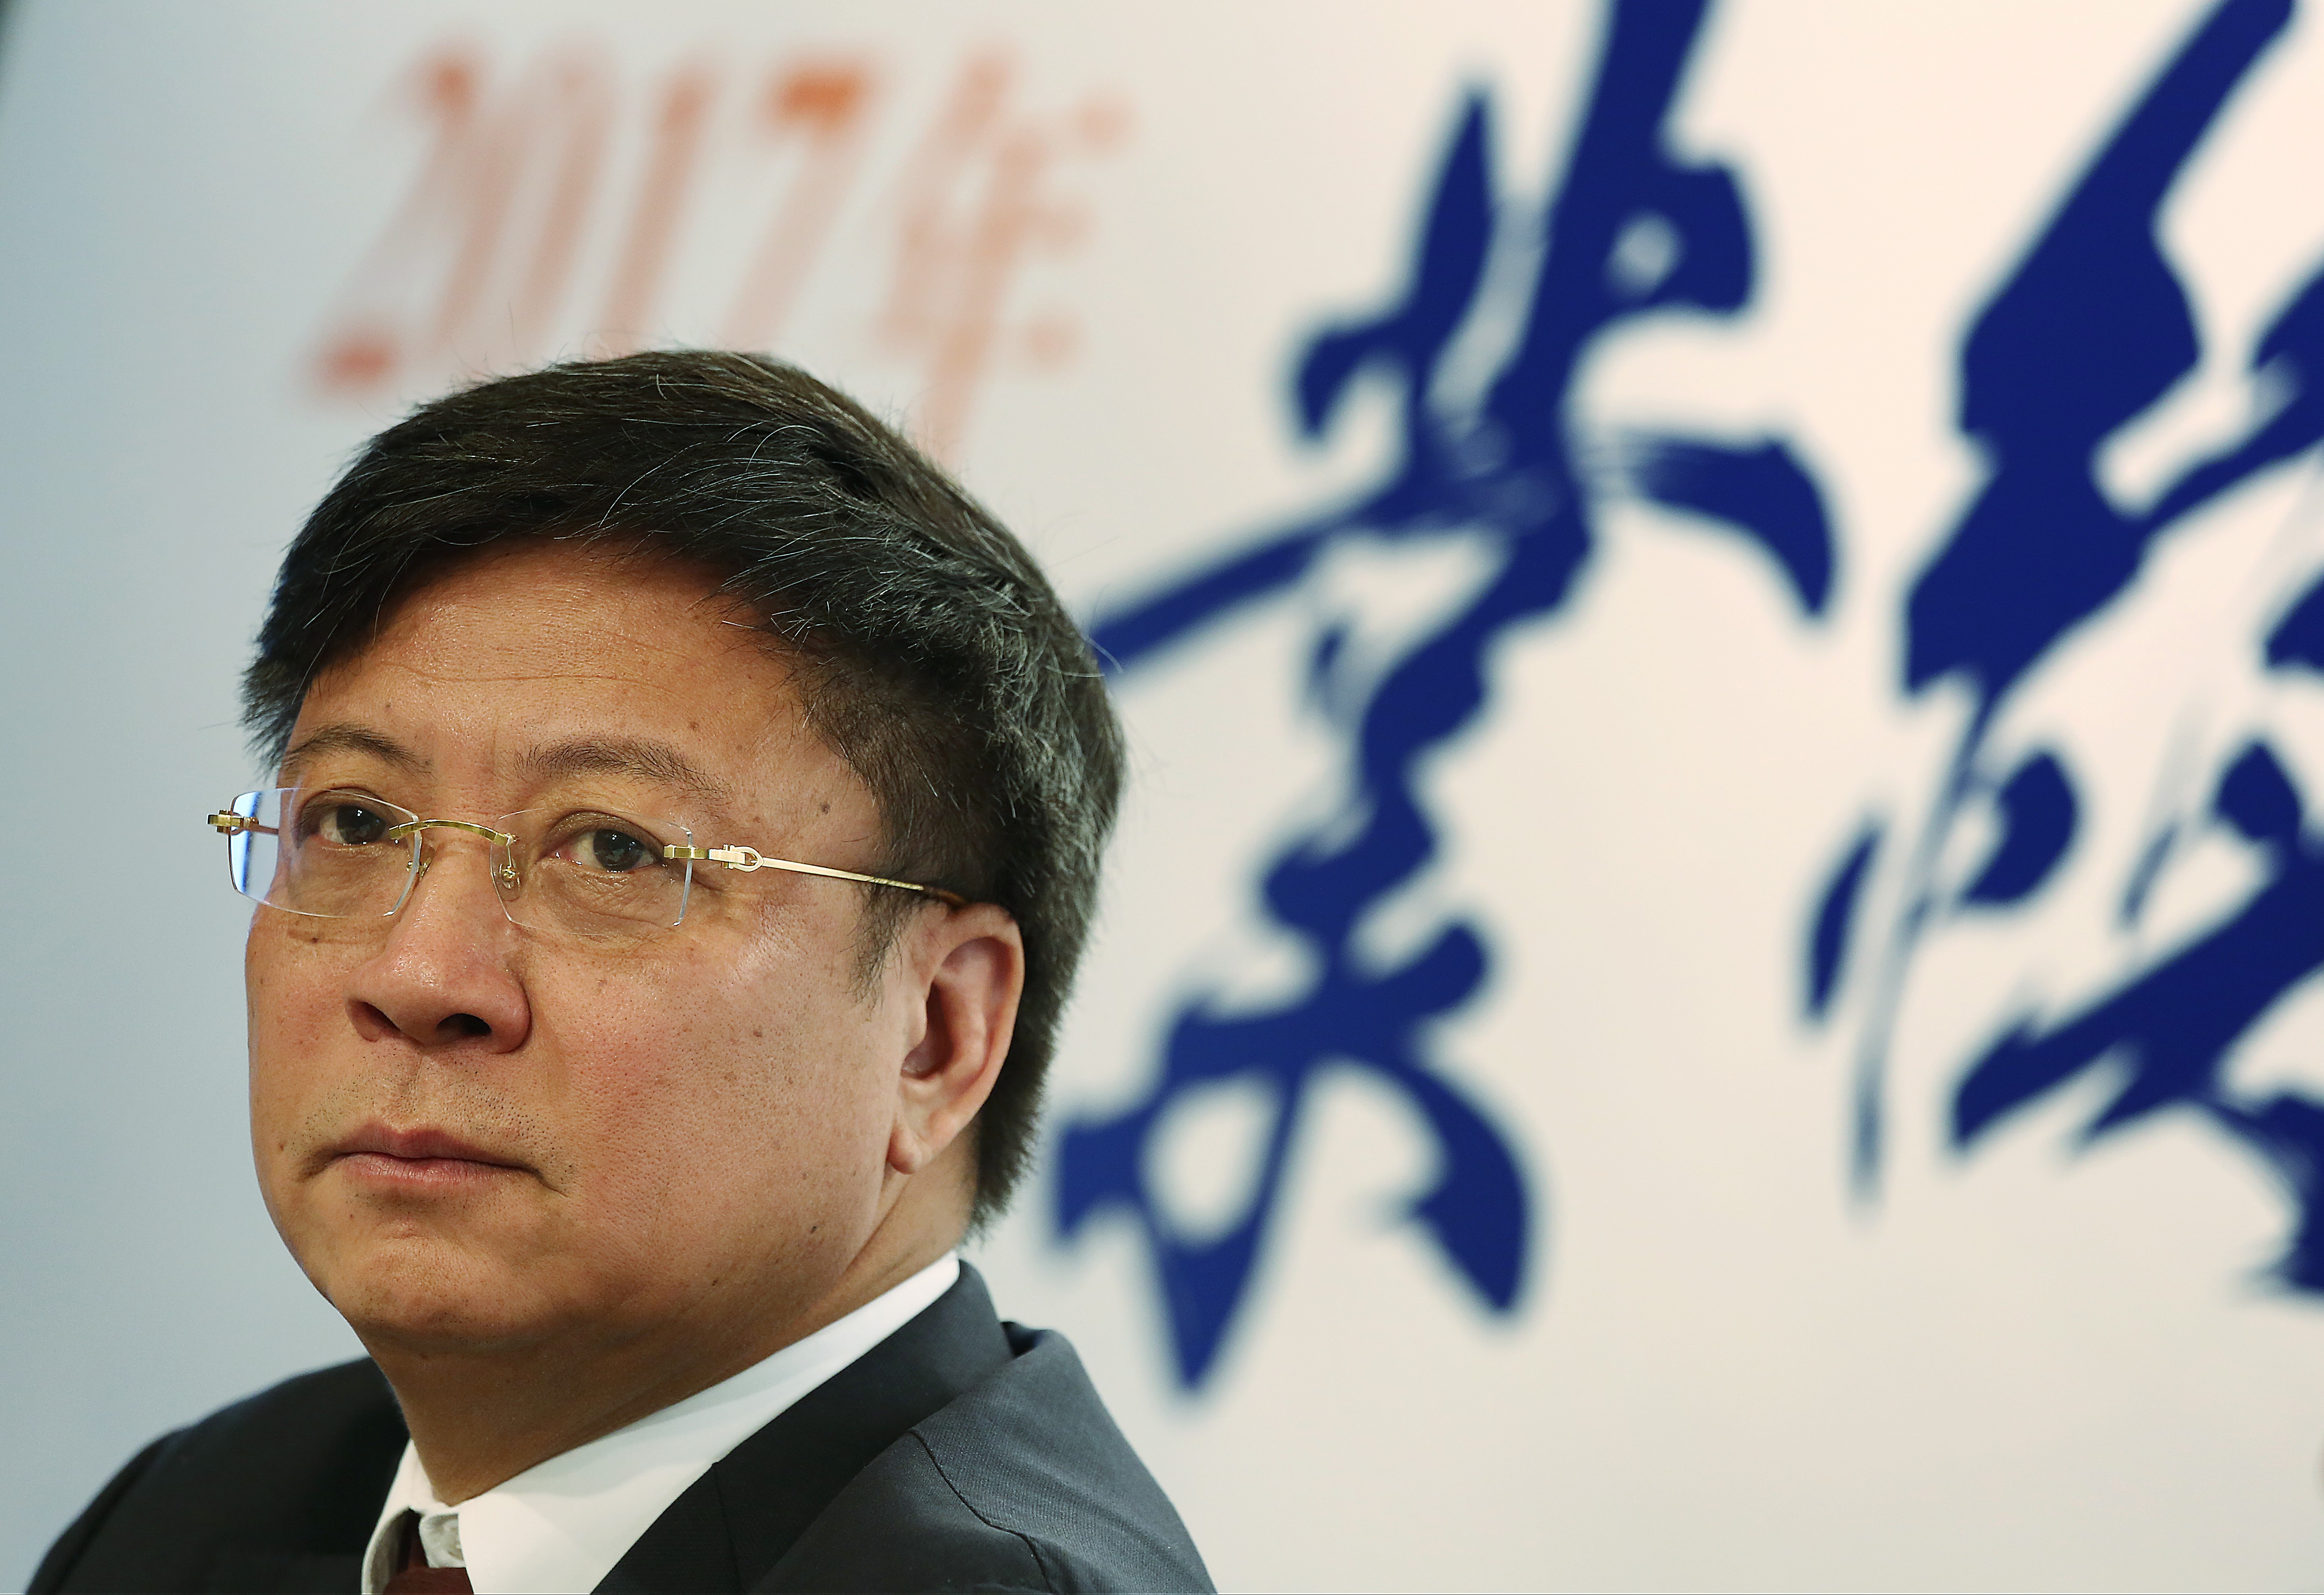 Sun Hongbin, chairman and executive director of Sunac China, has said he is interested in expanding into industries in which LeEco companies are operating. Photo: Jonathan Wong